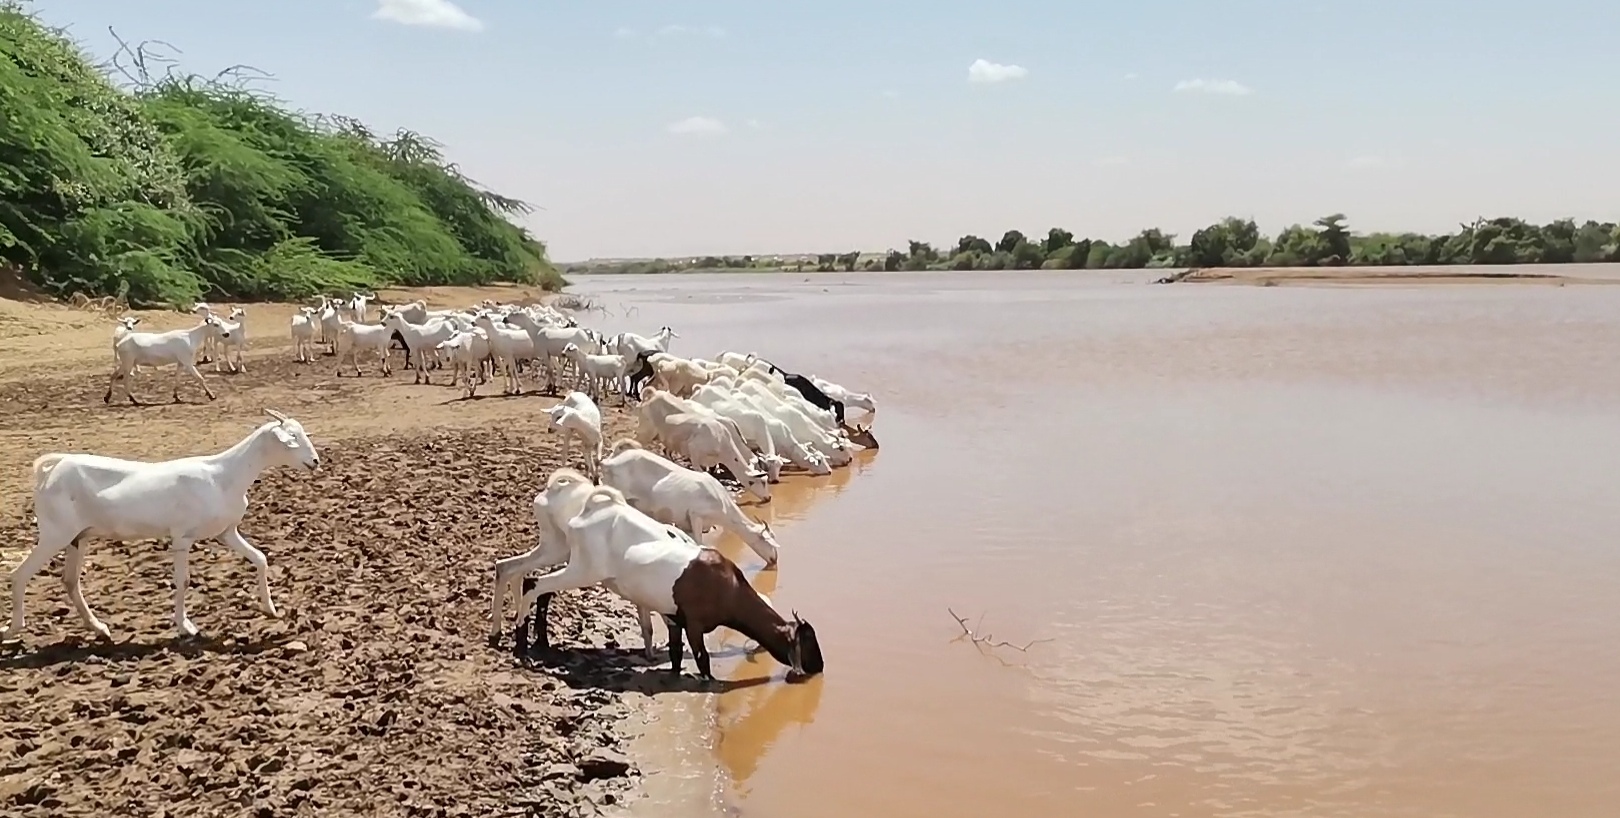 a heard of goats drinking from a shallow pond